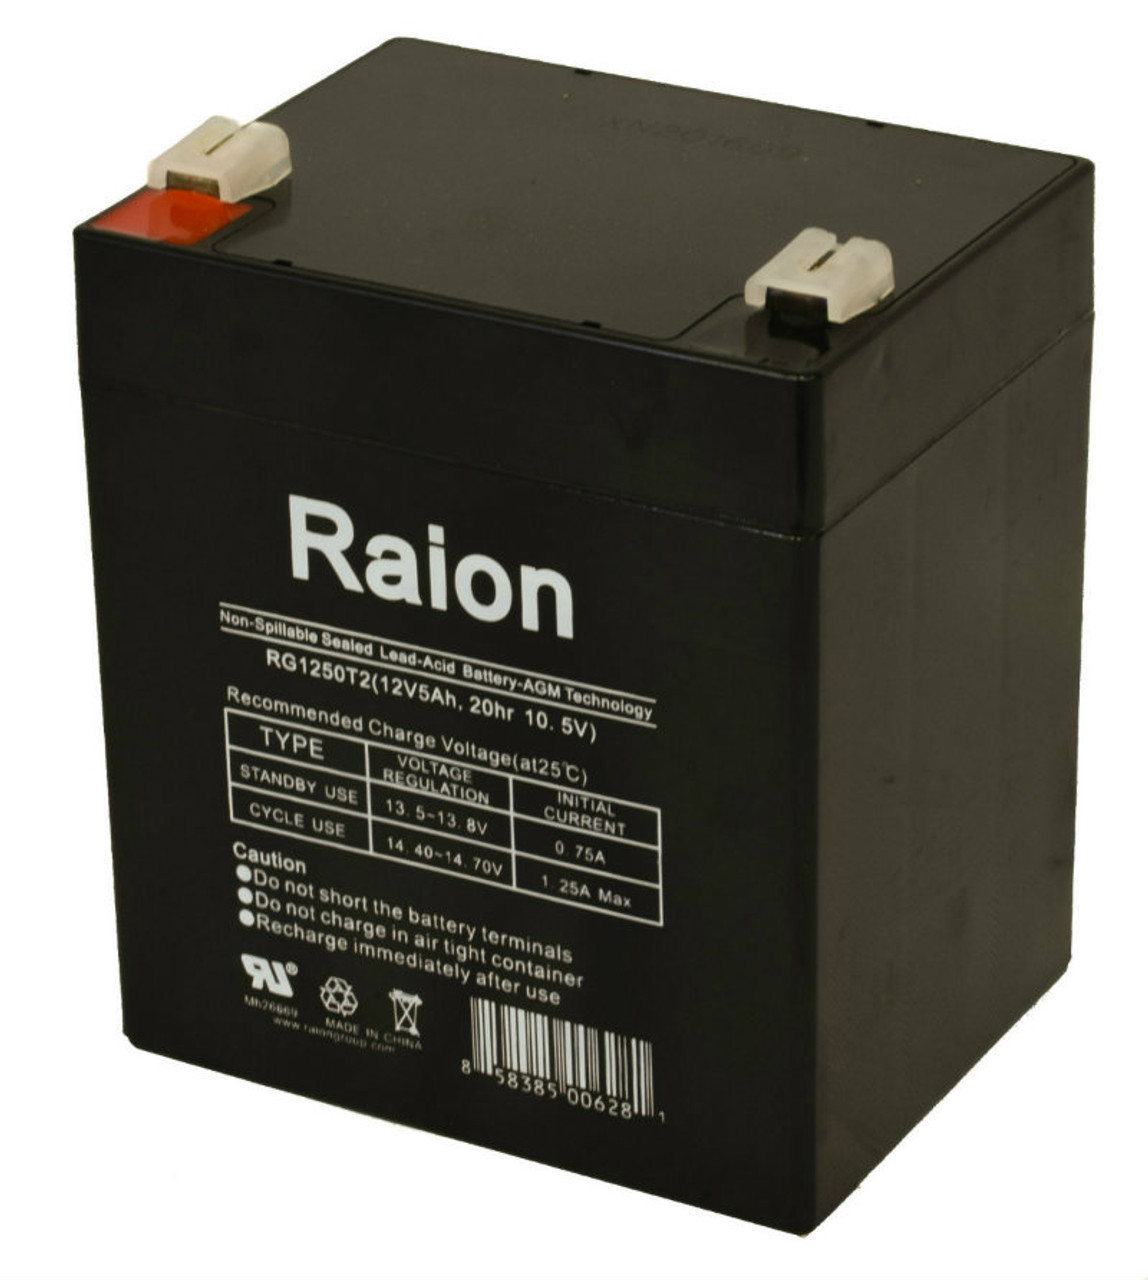 Raion Power RG1250T1 Replacement Alarm Security System Battery for ADT Security Safewatch Pro 3000